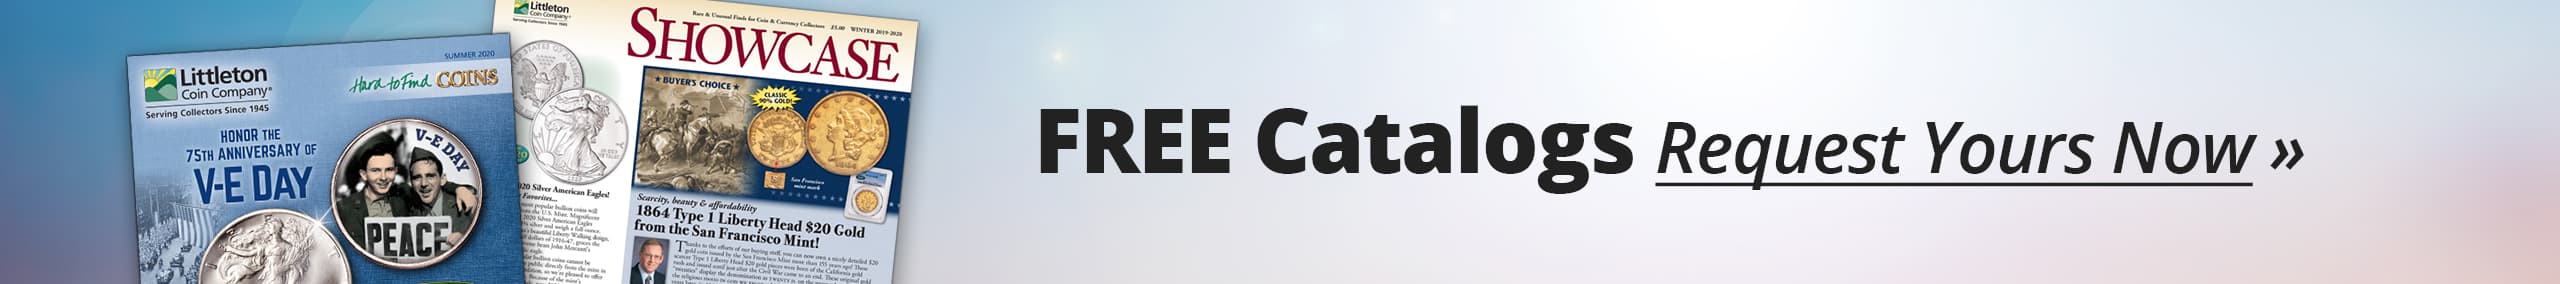 Free Catalogs - Request Yours Now